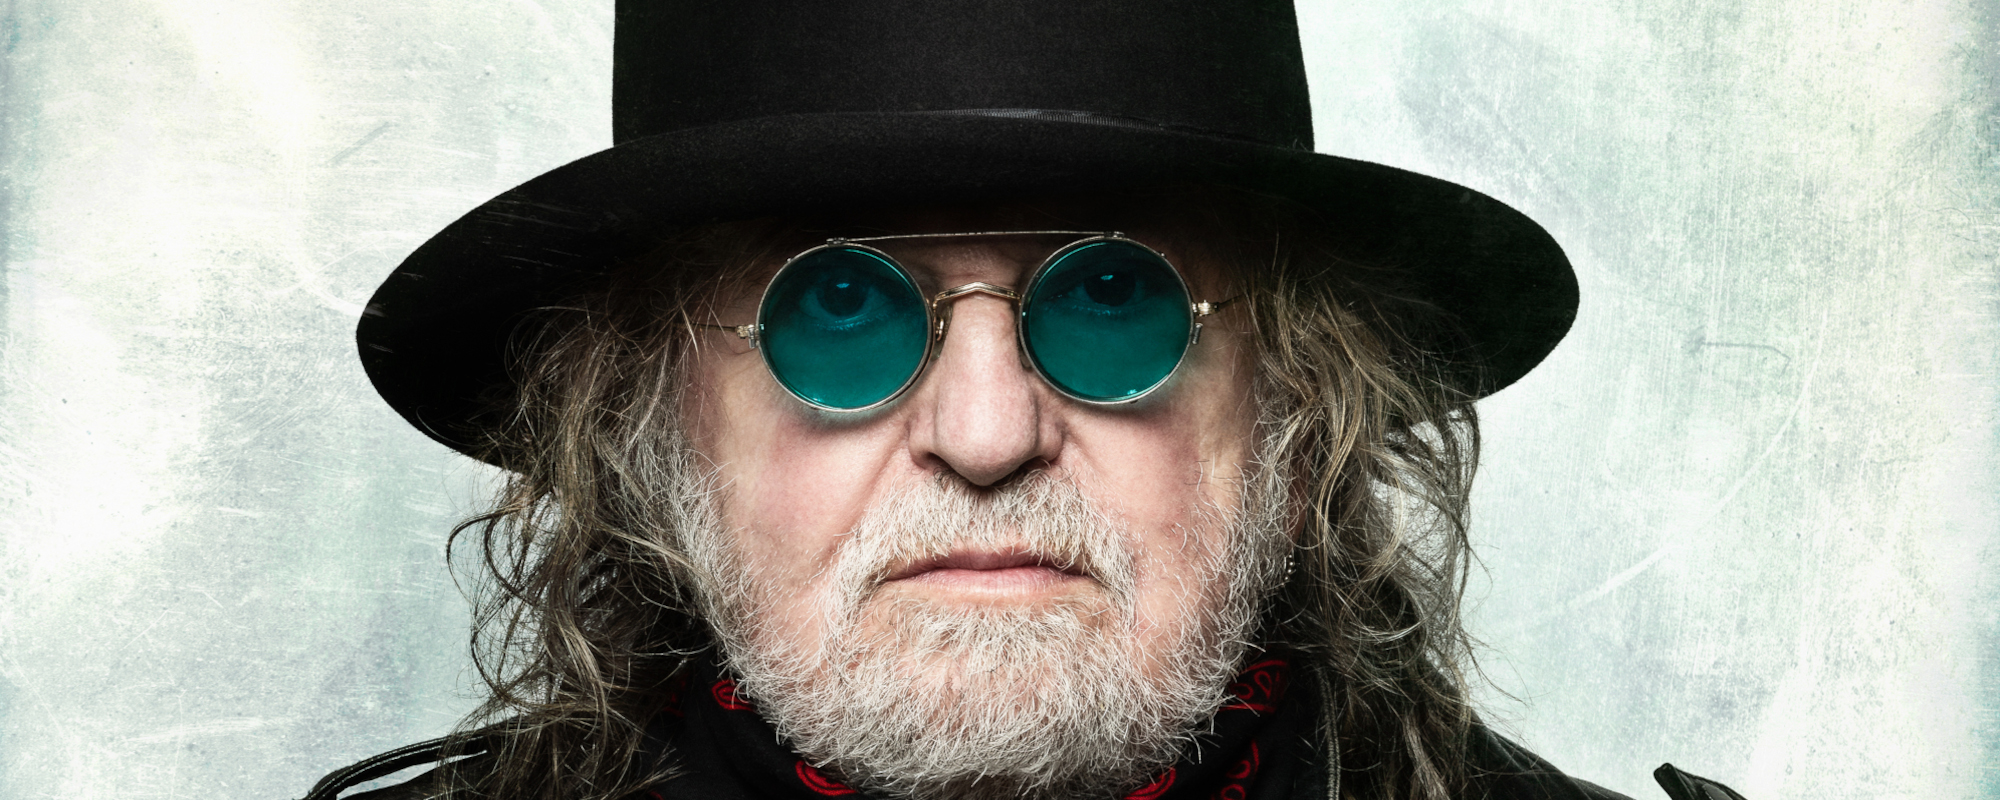 REVIEW: Even in the Midst of a Hoard of Superstars, Ray Wylie Hubbard’s Star Shines Especially Bright